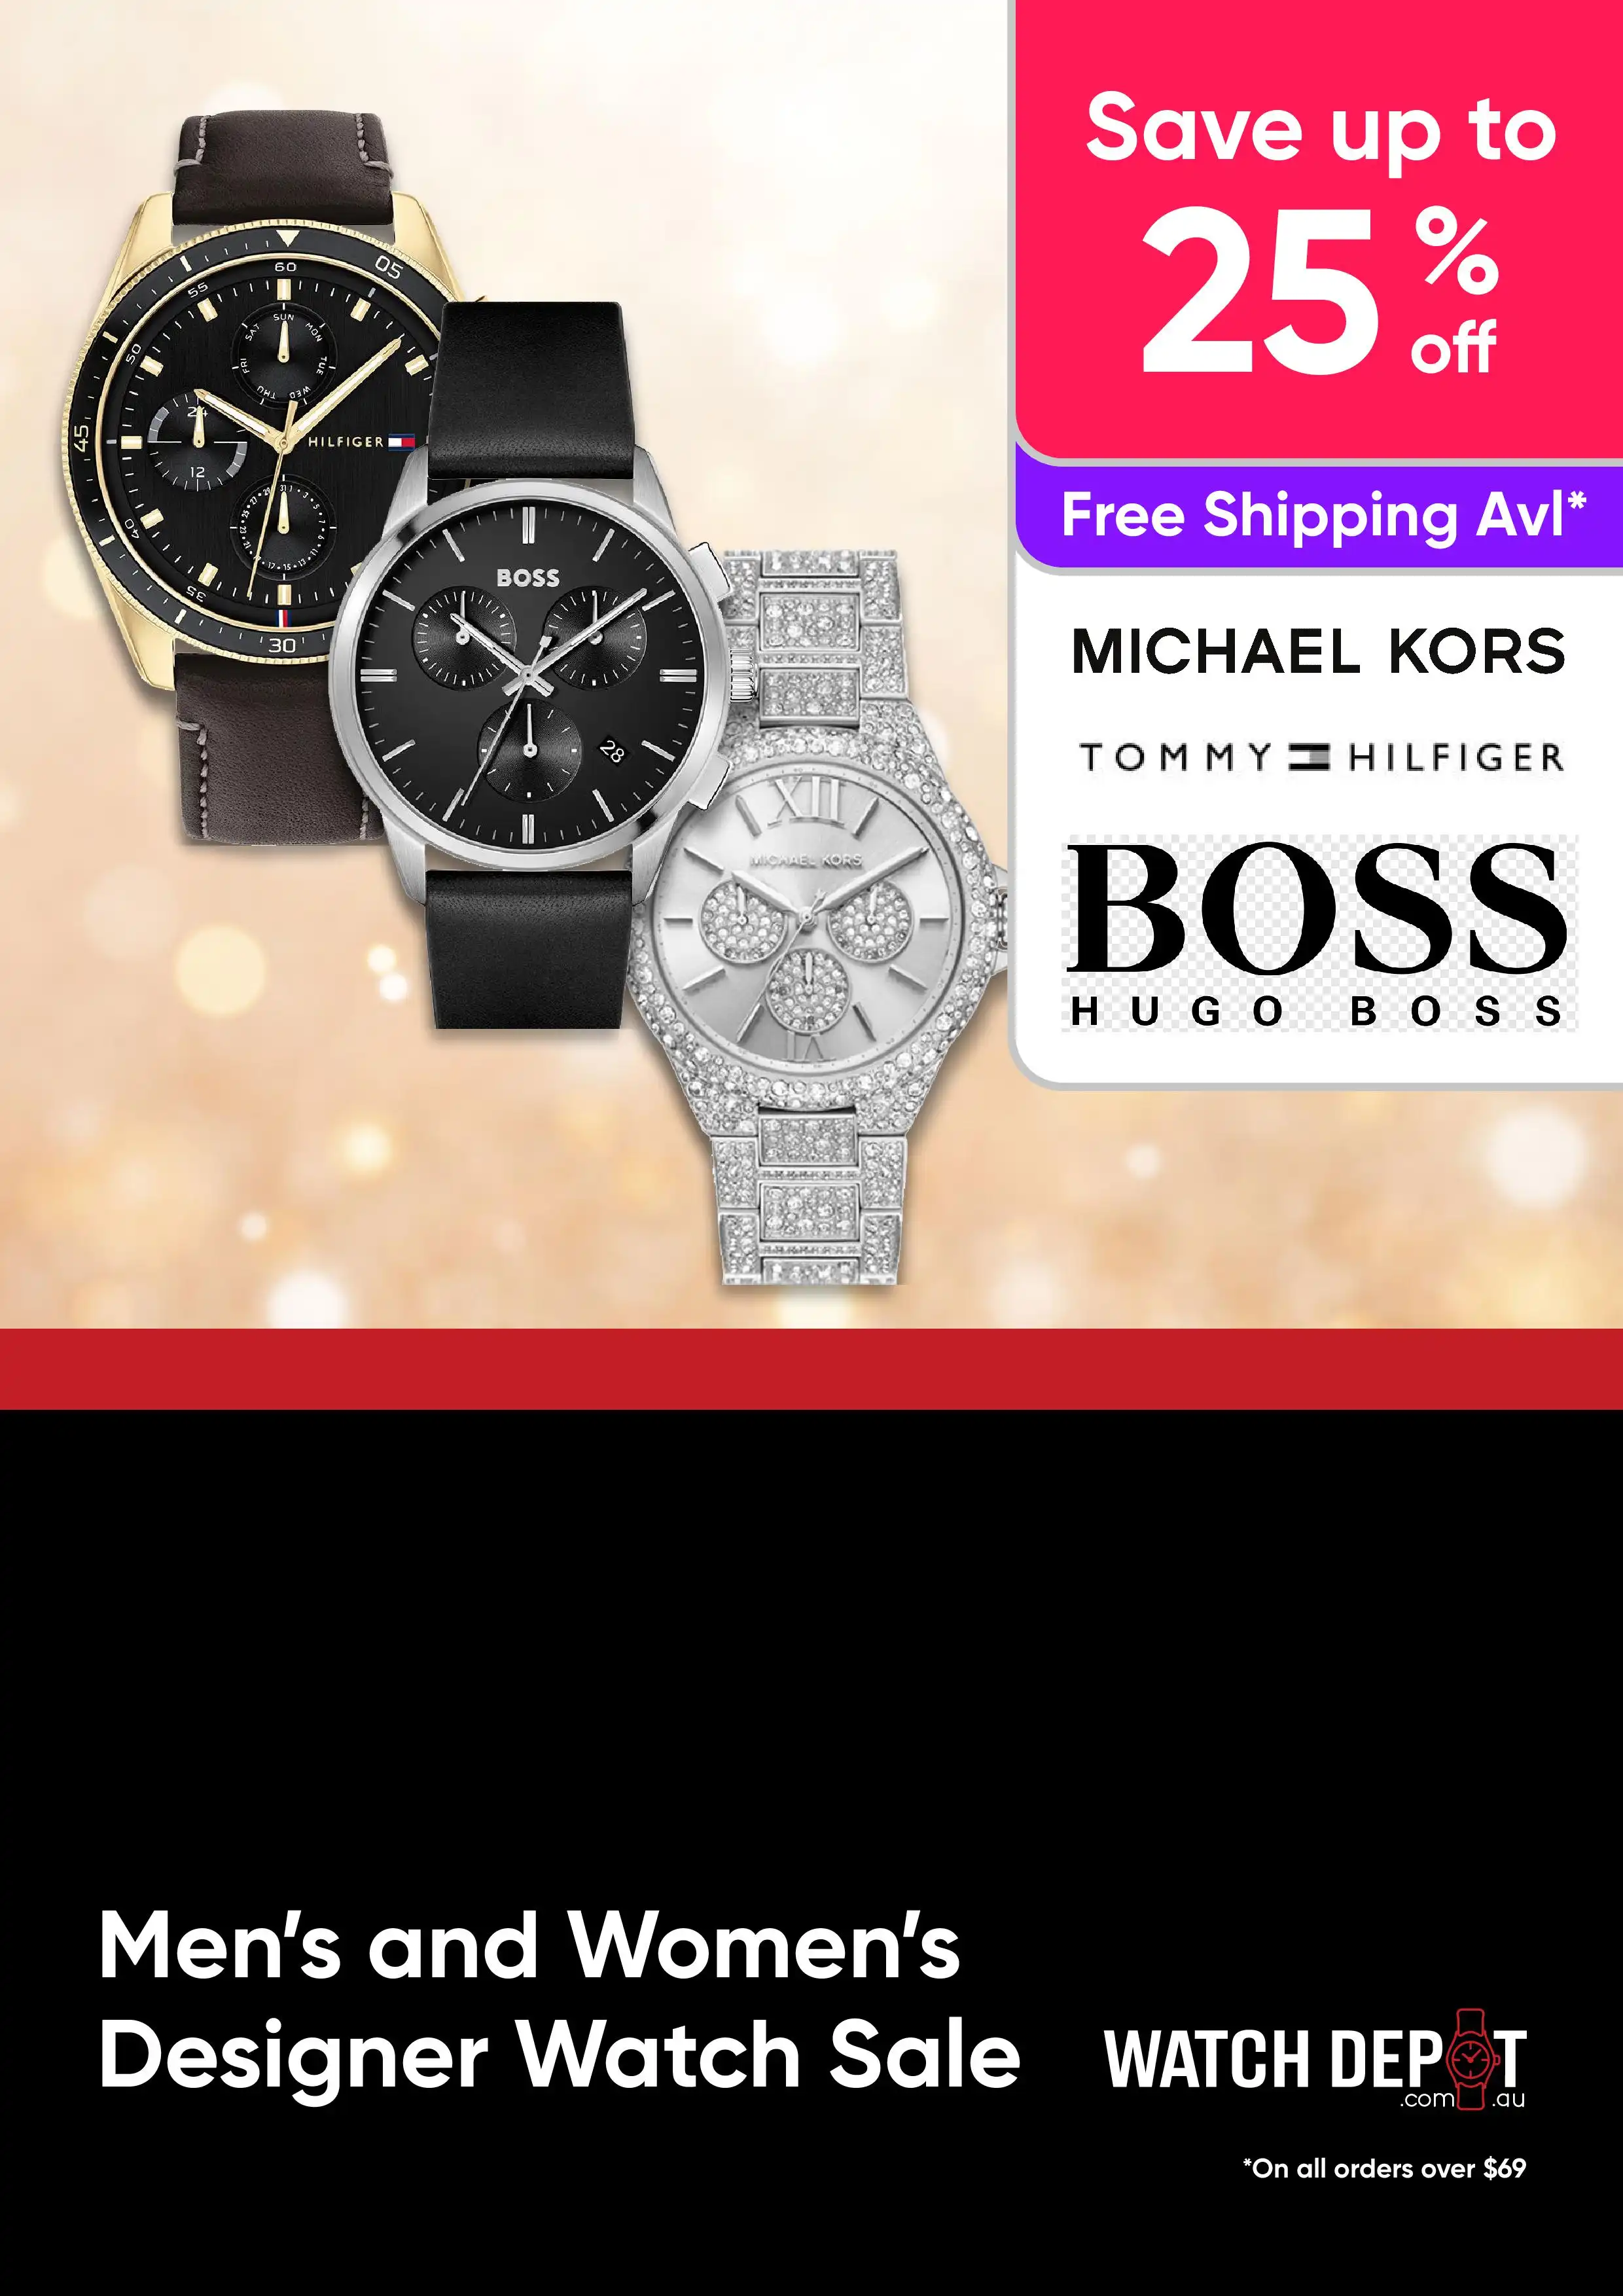 Designer Watches on Sale - Guess, Hugo Boss, Michael Kors, Tommy Hilfiger - Up to 25% off